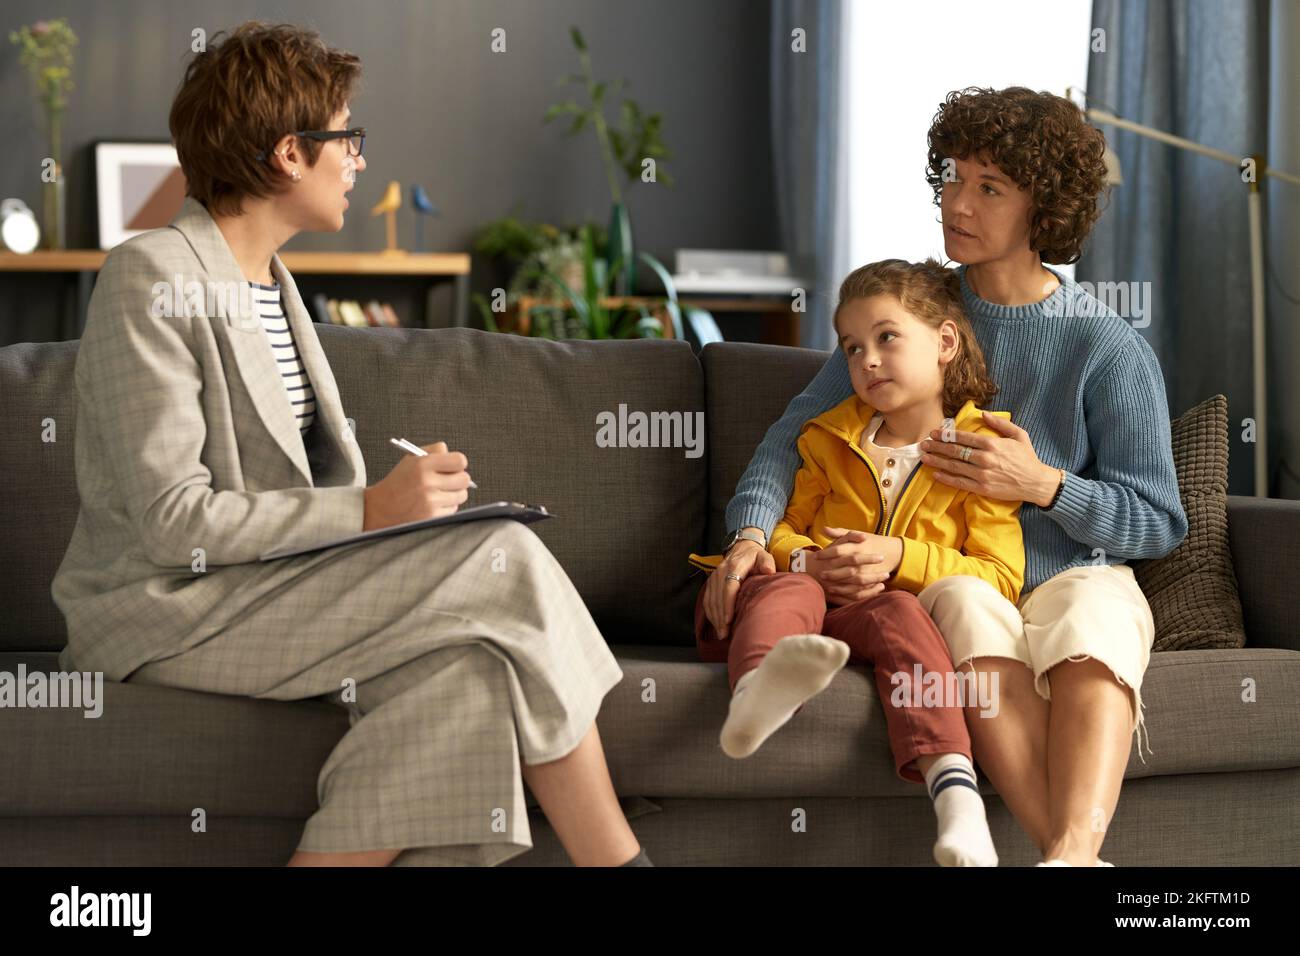 Social worker making notes while talking to adoptive parent and child during their meeting at home Stock Photo